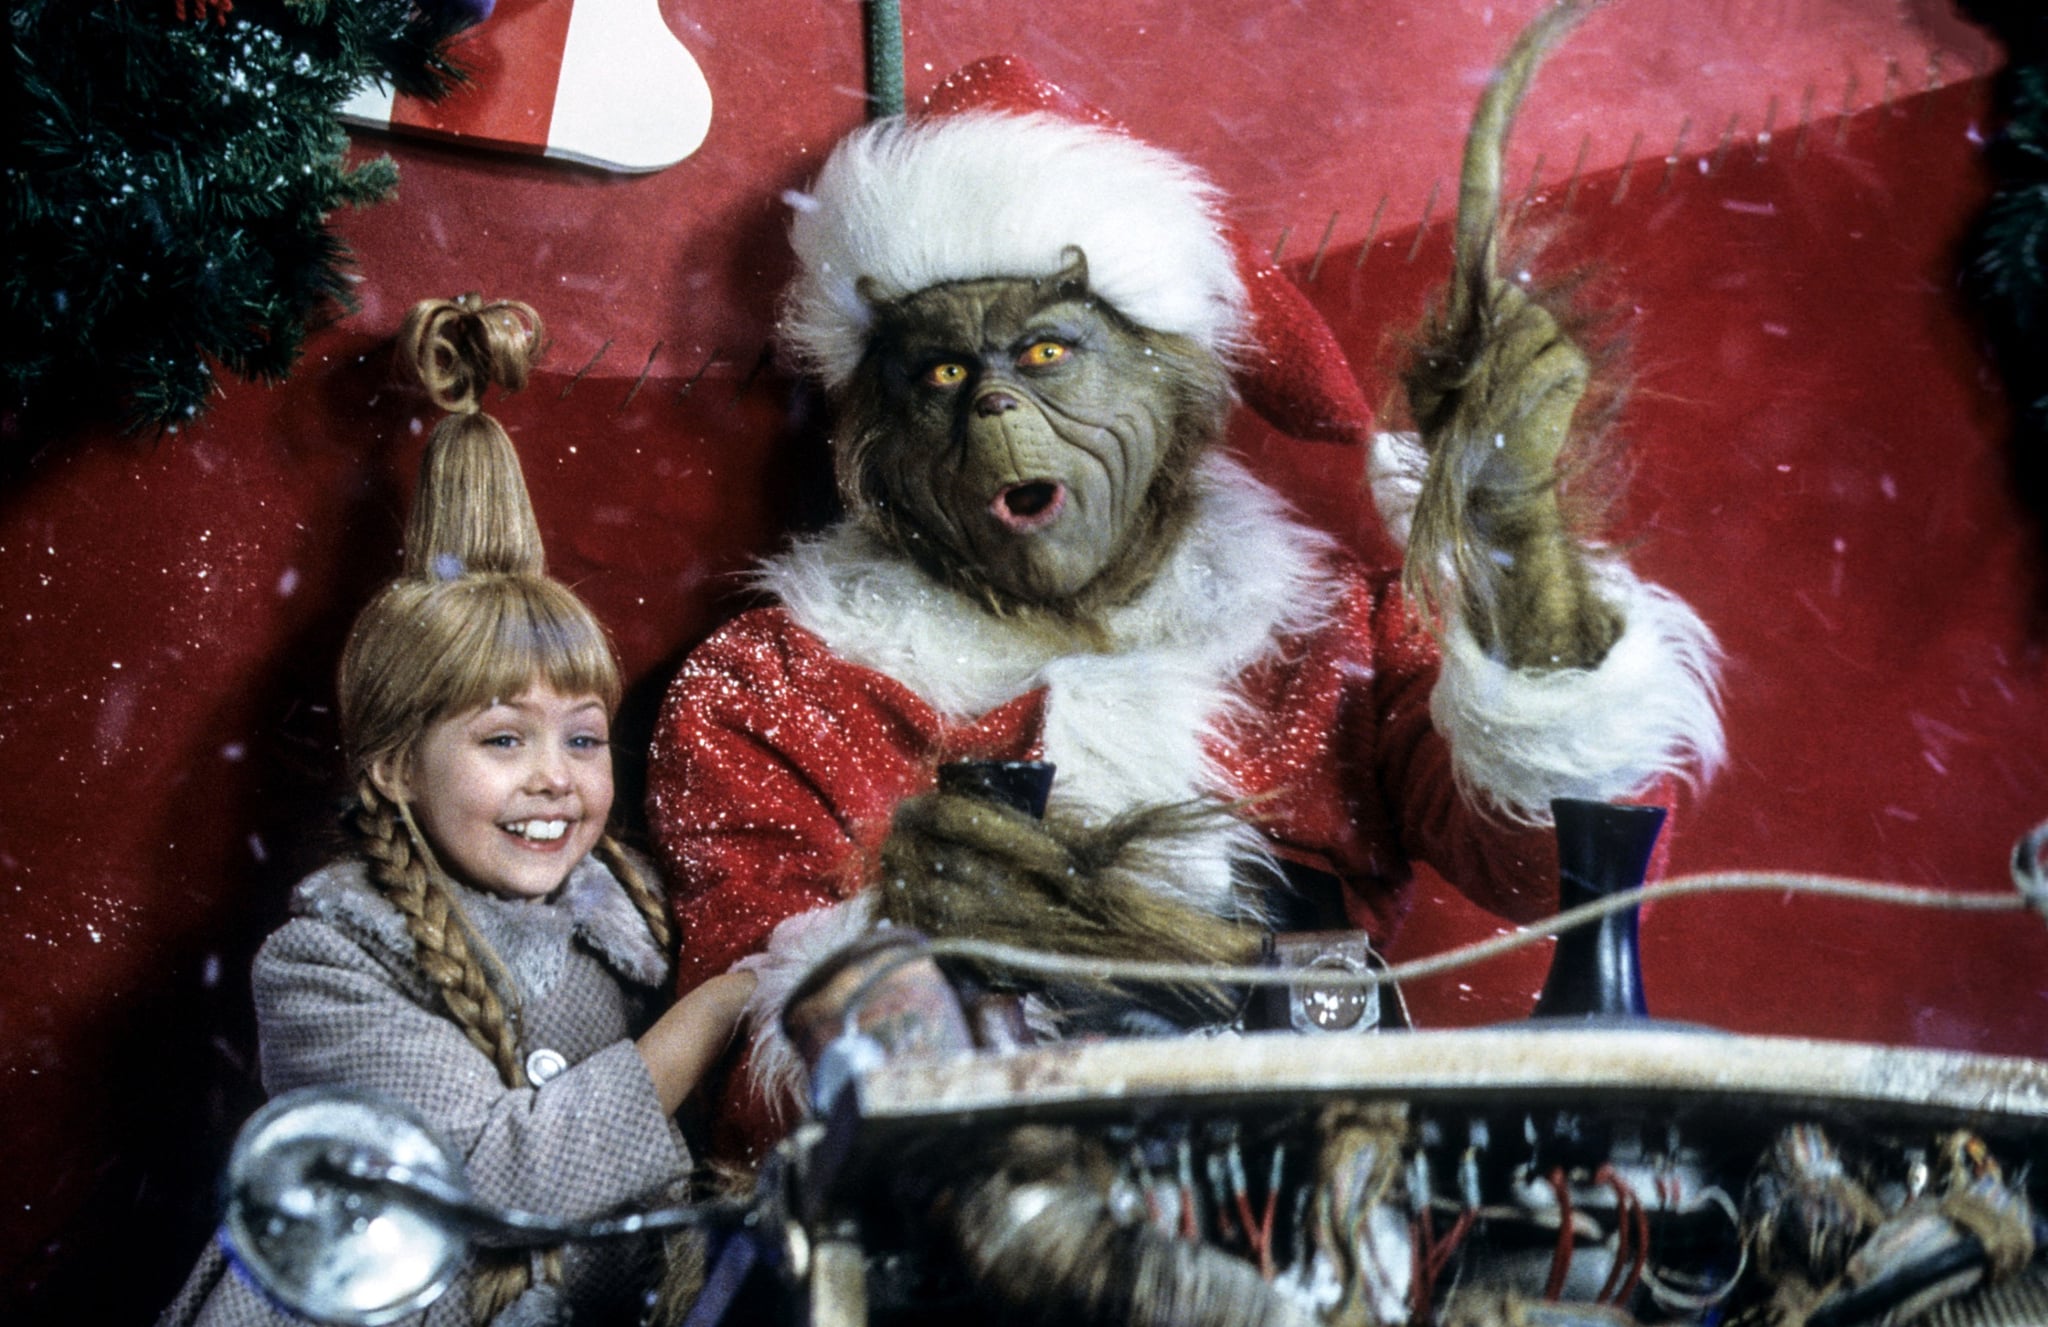 Did you know in the live action movie, the Grinch suit was made